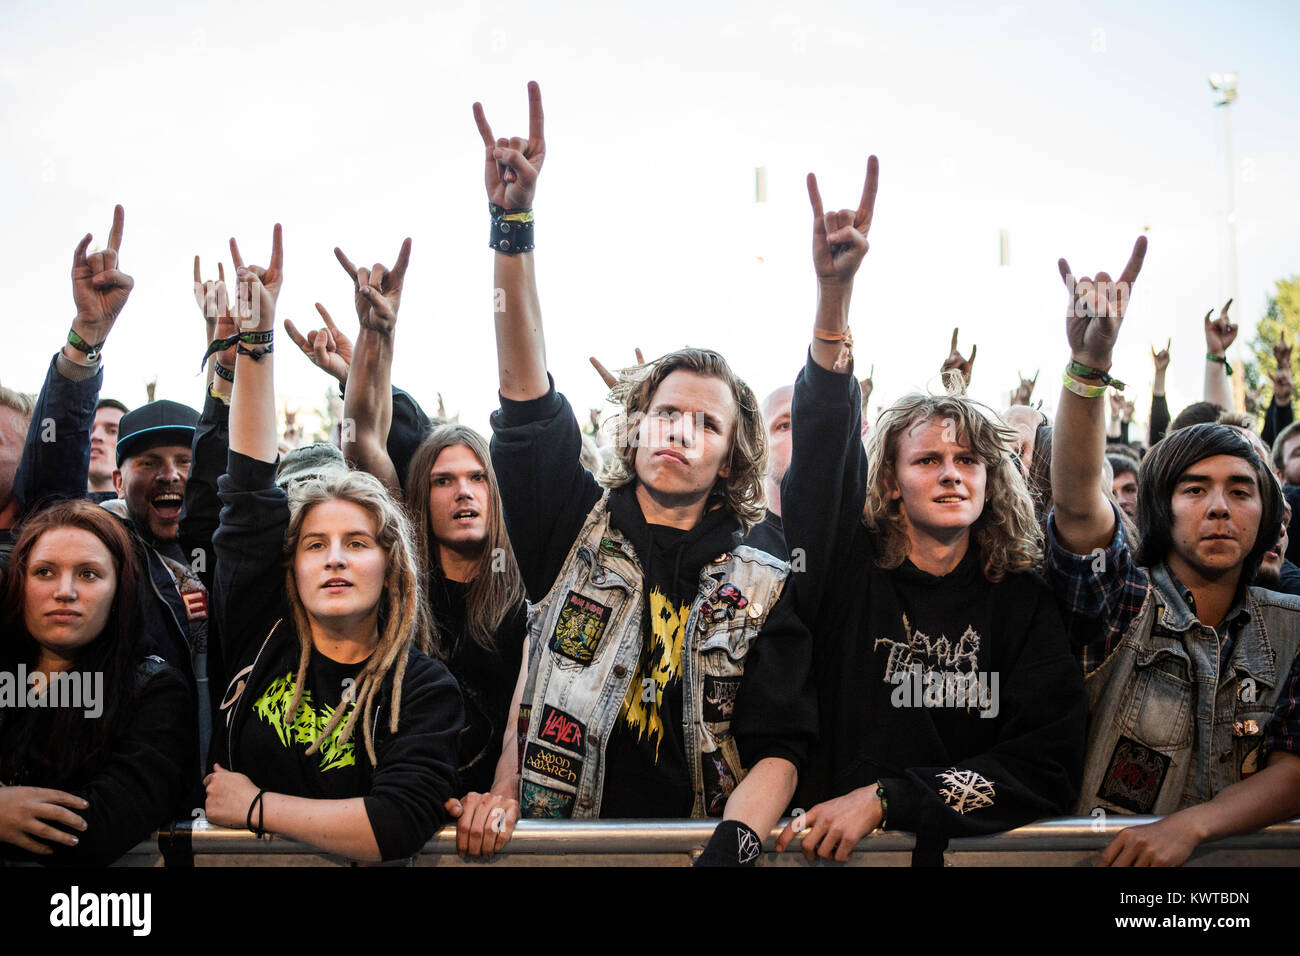 Heavy metal fans photography and images -